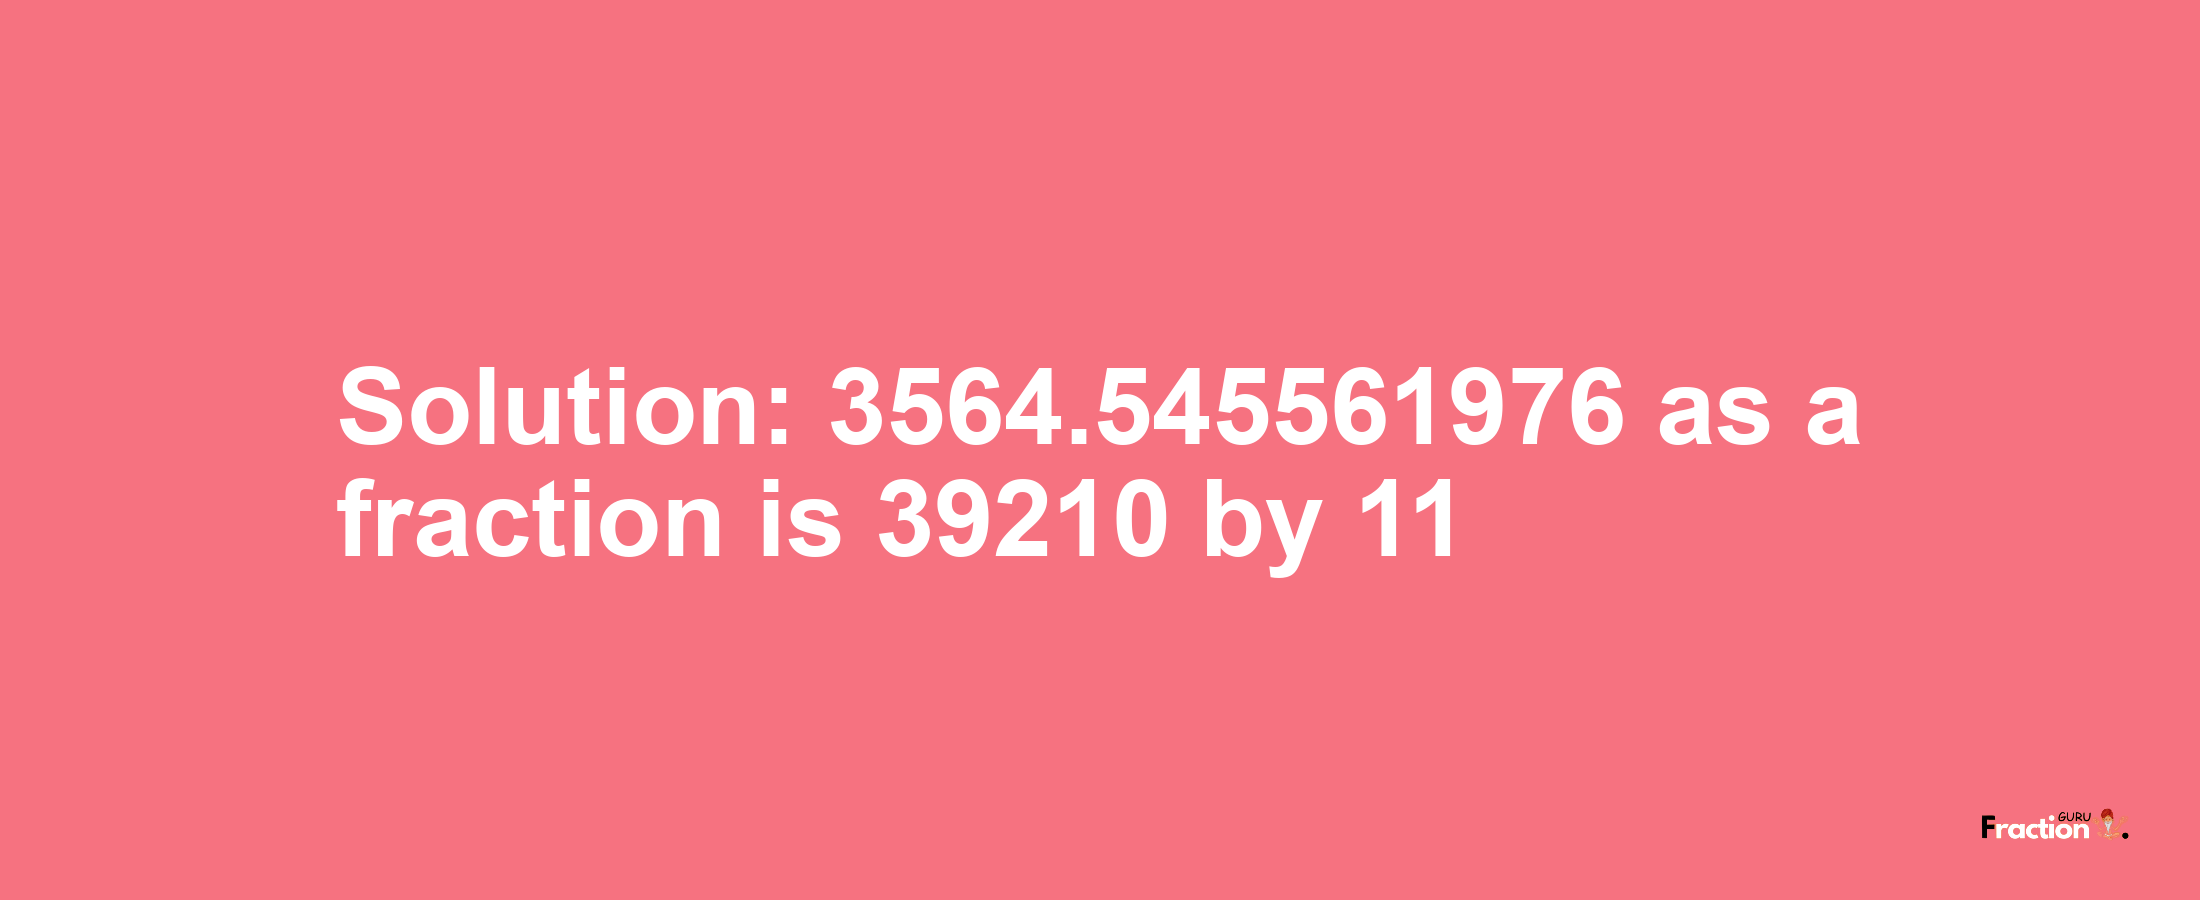 Solution:3564.545561976 as a fraction is 39210/11